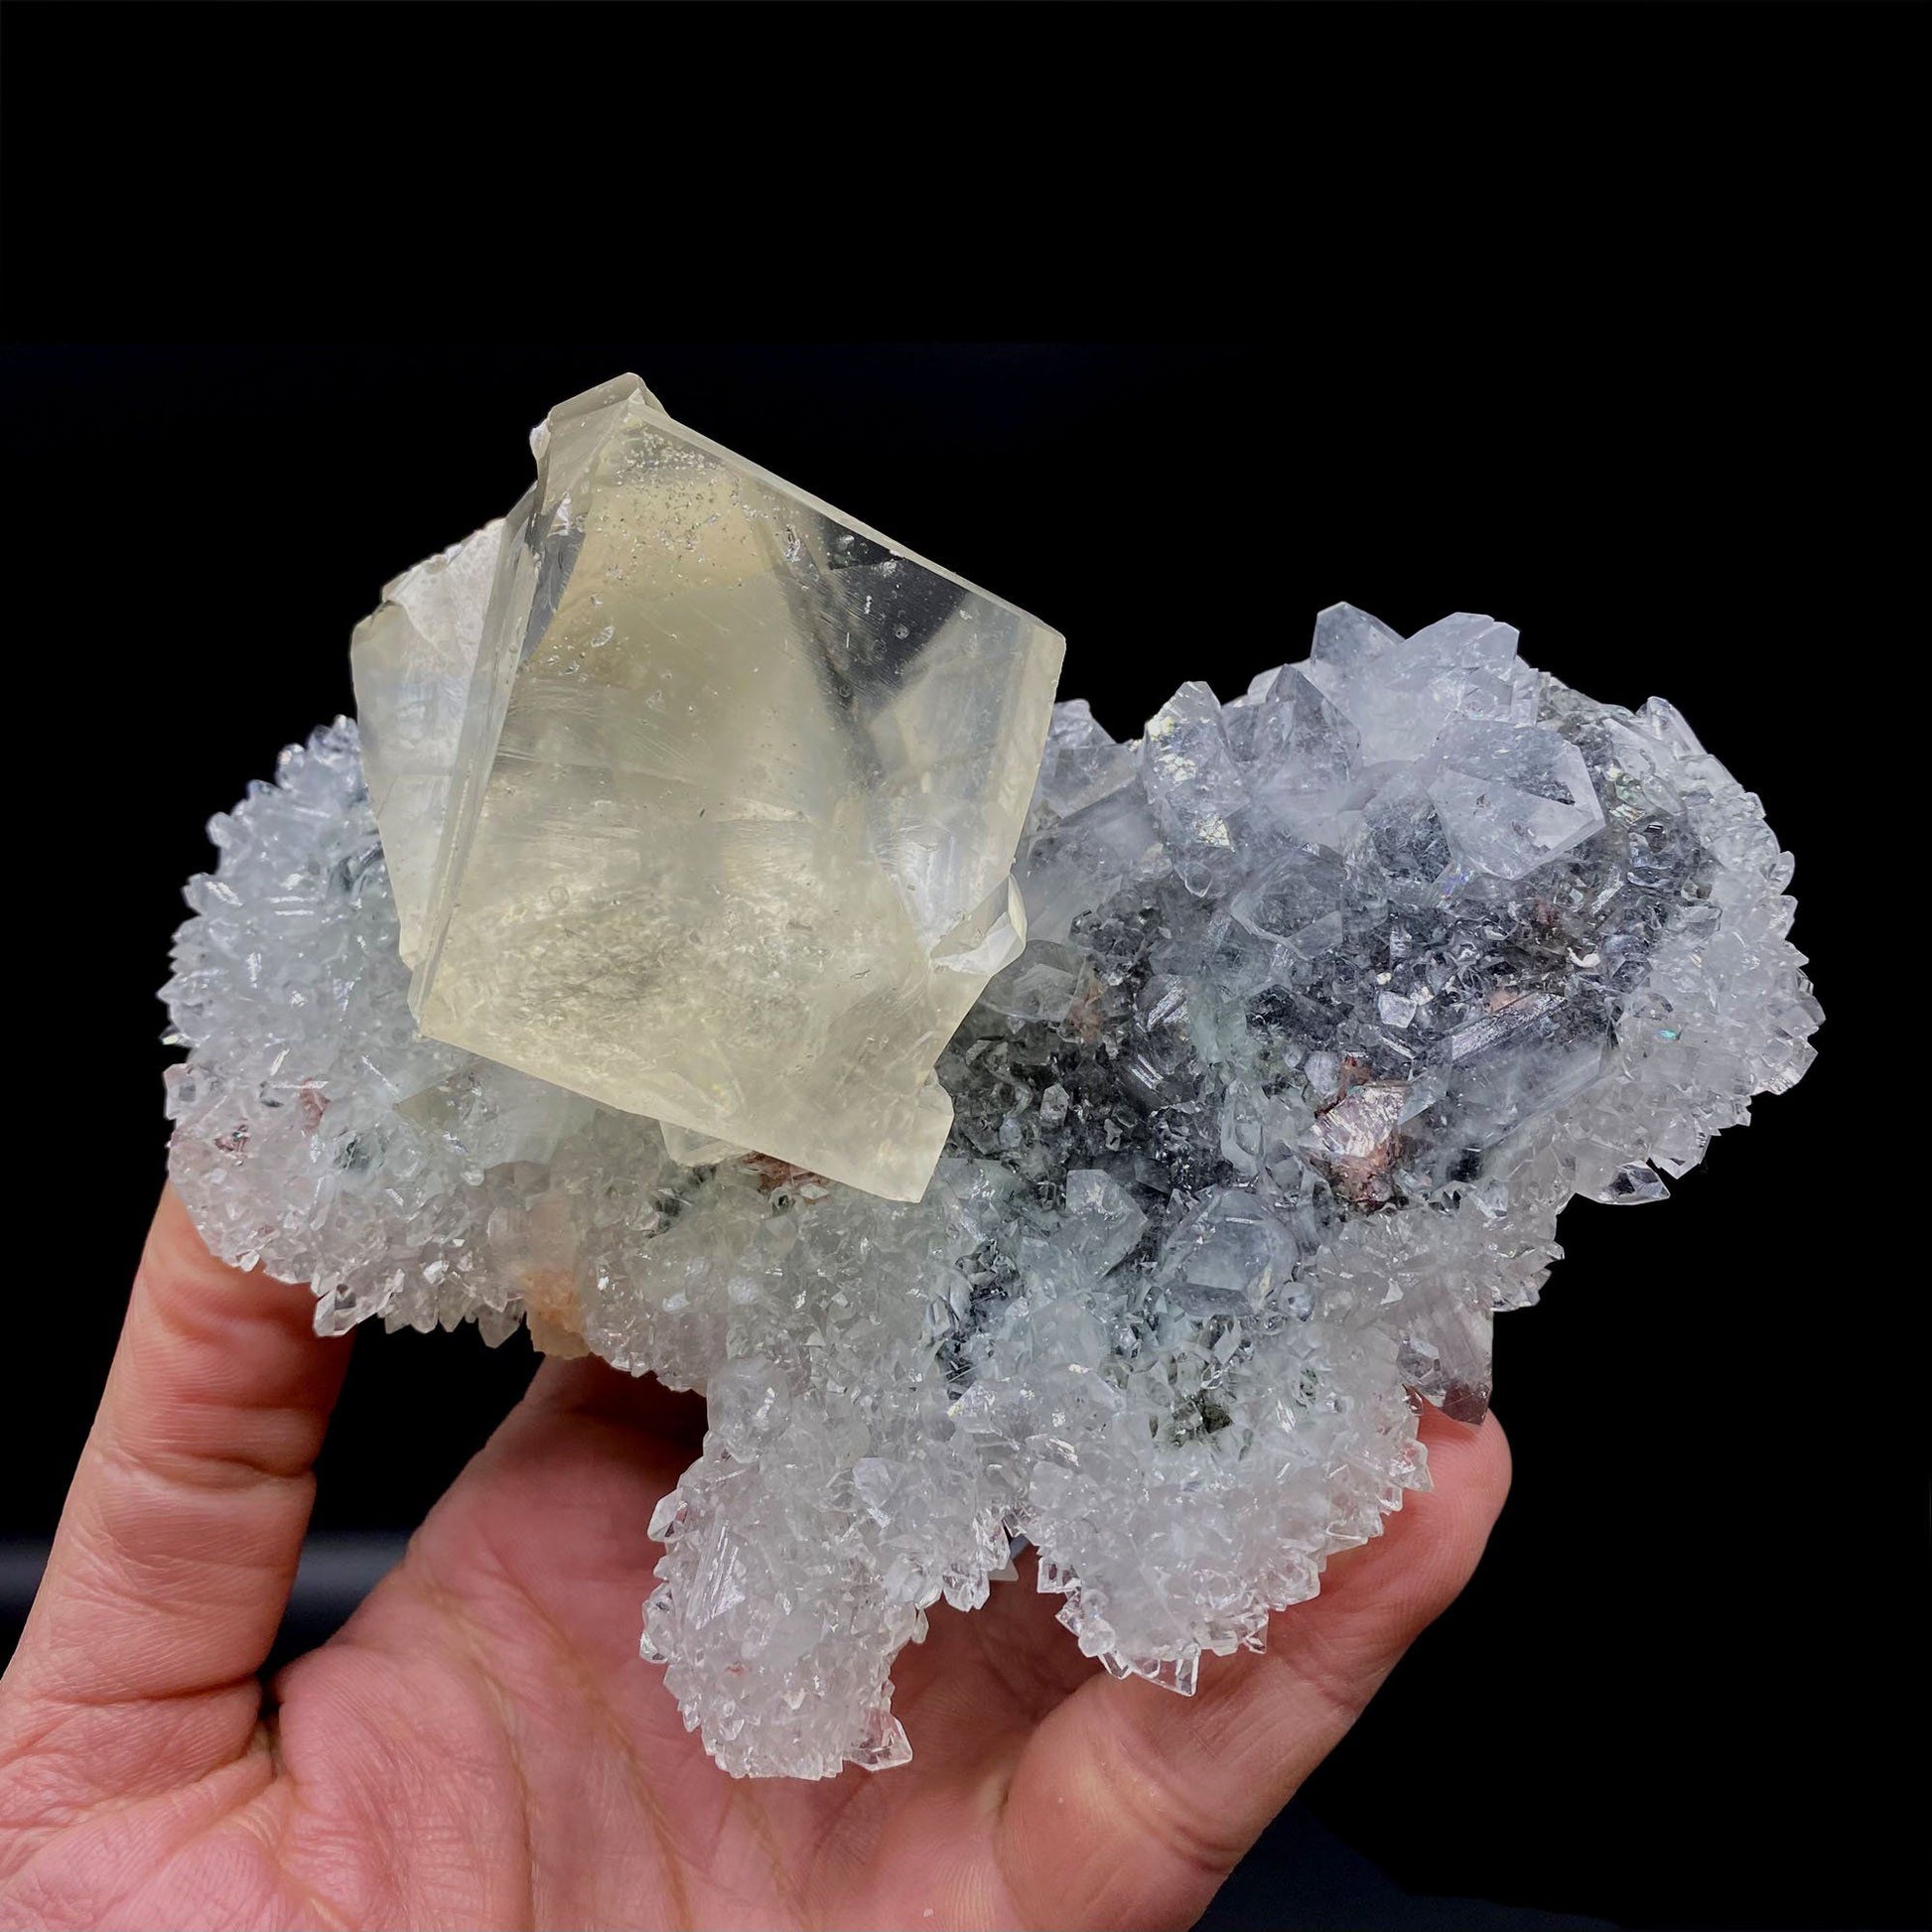 Calcite with Apophyllite on Heuladnite # Q9  https://www.superbminerals.us/products/calcite-with-apophyllite-on-heuladnite-q9  Features:Fascinating specimen of Calcite and impressive mirror lustrous gemmy Apophyllite crystals from superb find in Jalgaon. It displays twin honey colored Calcite Cube, well formed superb flat faces with excellent brilliance and light reflection.&nbsp; Lustrous Calcite crystals grow at the top forming aesthetic